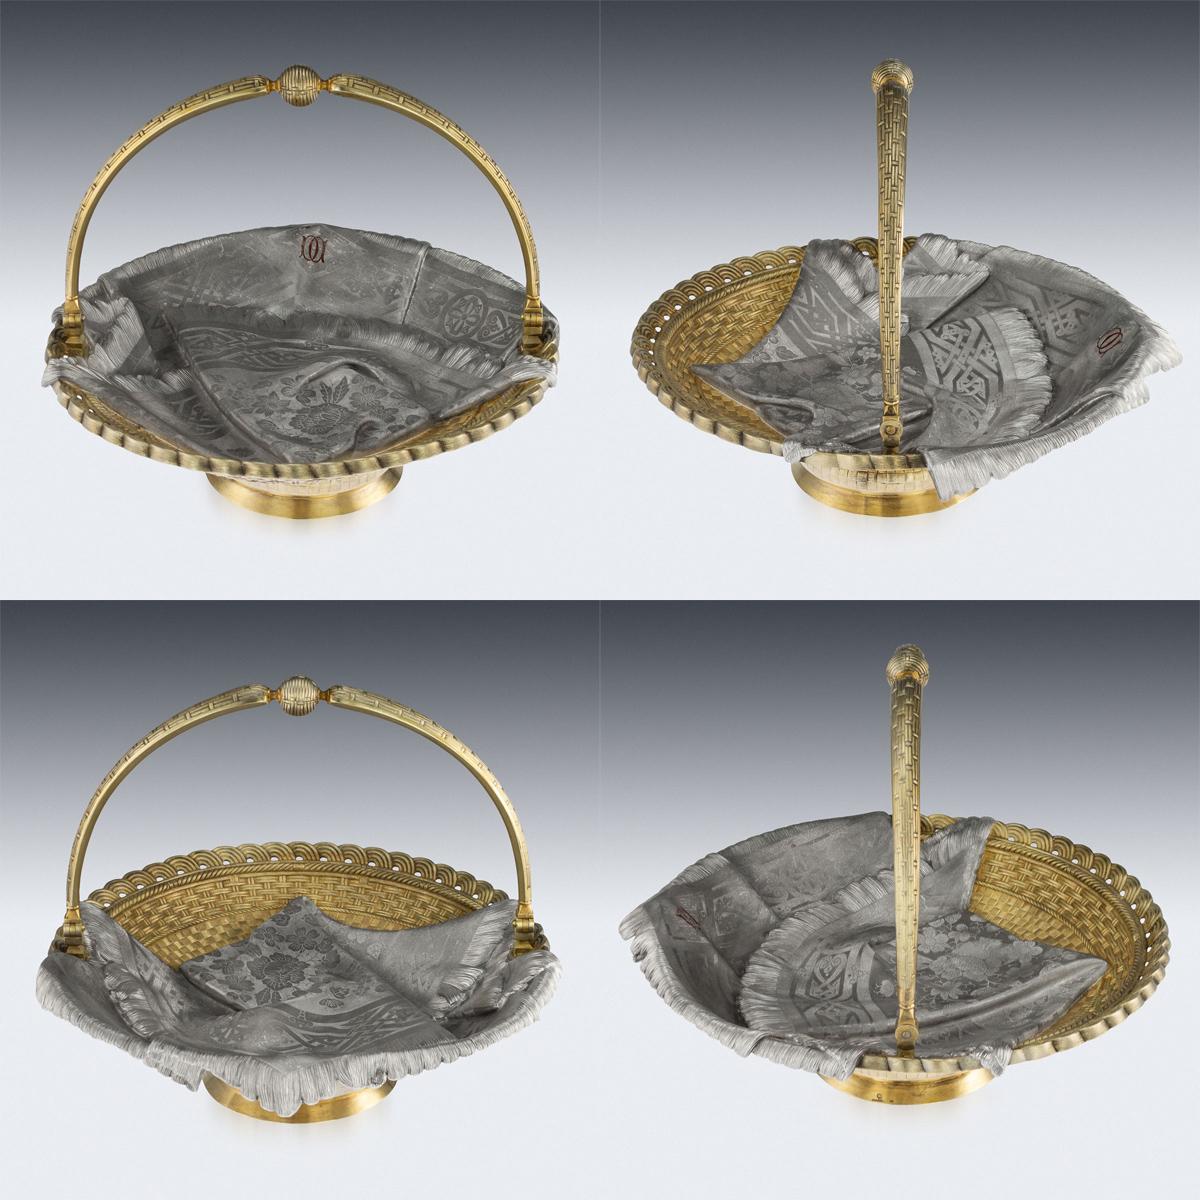 Antique 19th century Russian solid silver trompe l'oeil pair of bread baskets, large and of heavy gauge, of oval and round form, both embellished with a fringed cloth on woven ground, the smaller flanked by a pair of ropetwist handles and raised on